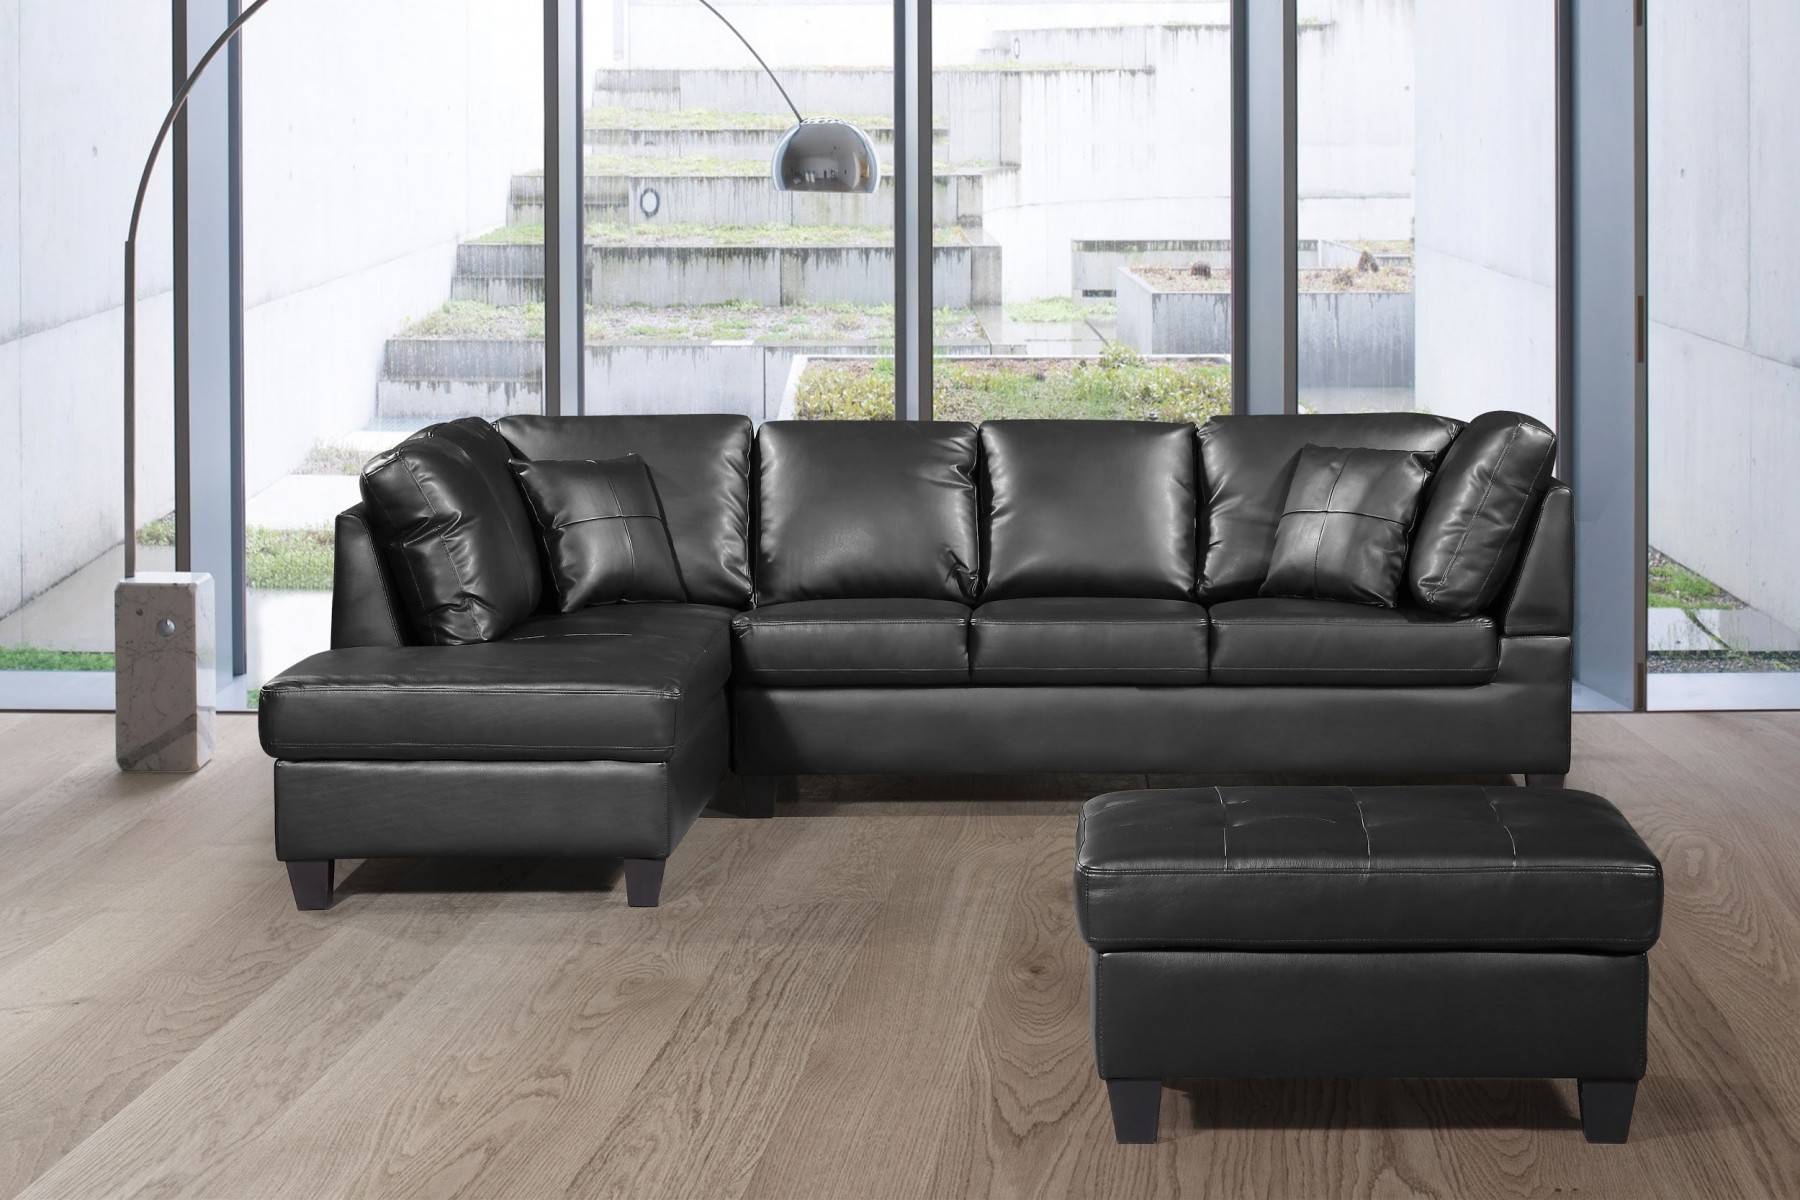 black tufted leather sectional sofa 114.5